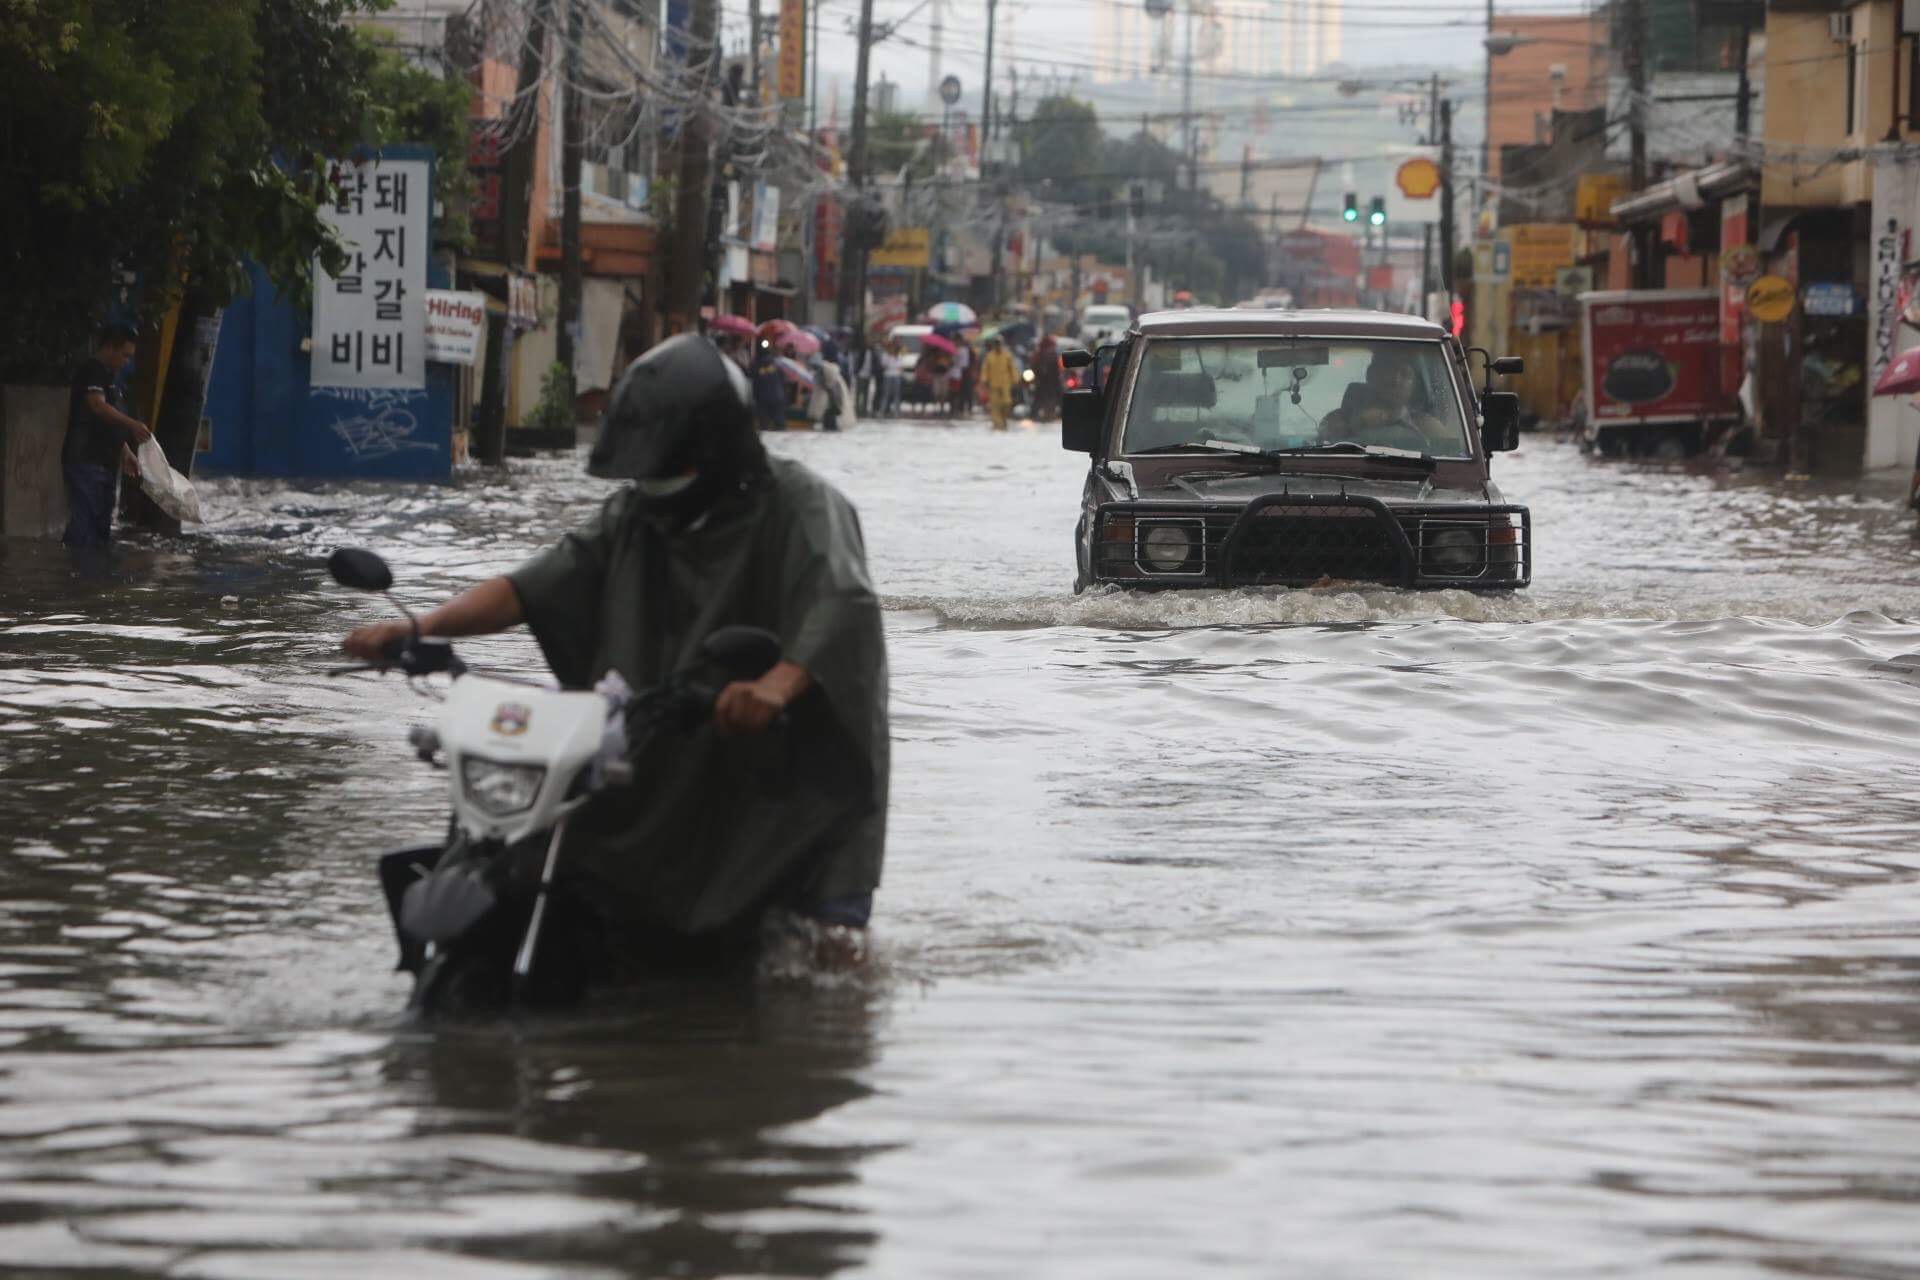 AS Fortuna road in Mandaue City was submerged in flood due to heavy rains on Sunday dawn brought about by Tropical Depression Crising. (CDN PHOTO/TONEE DESPOJO)